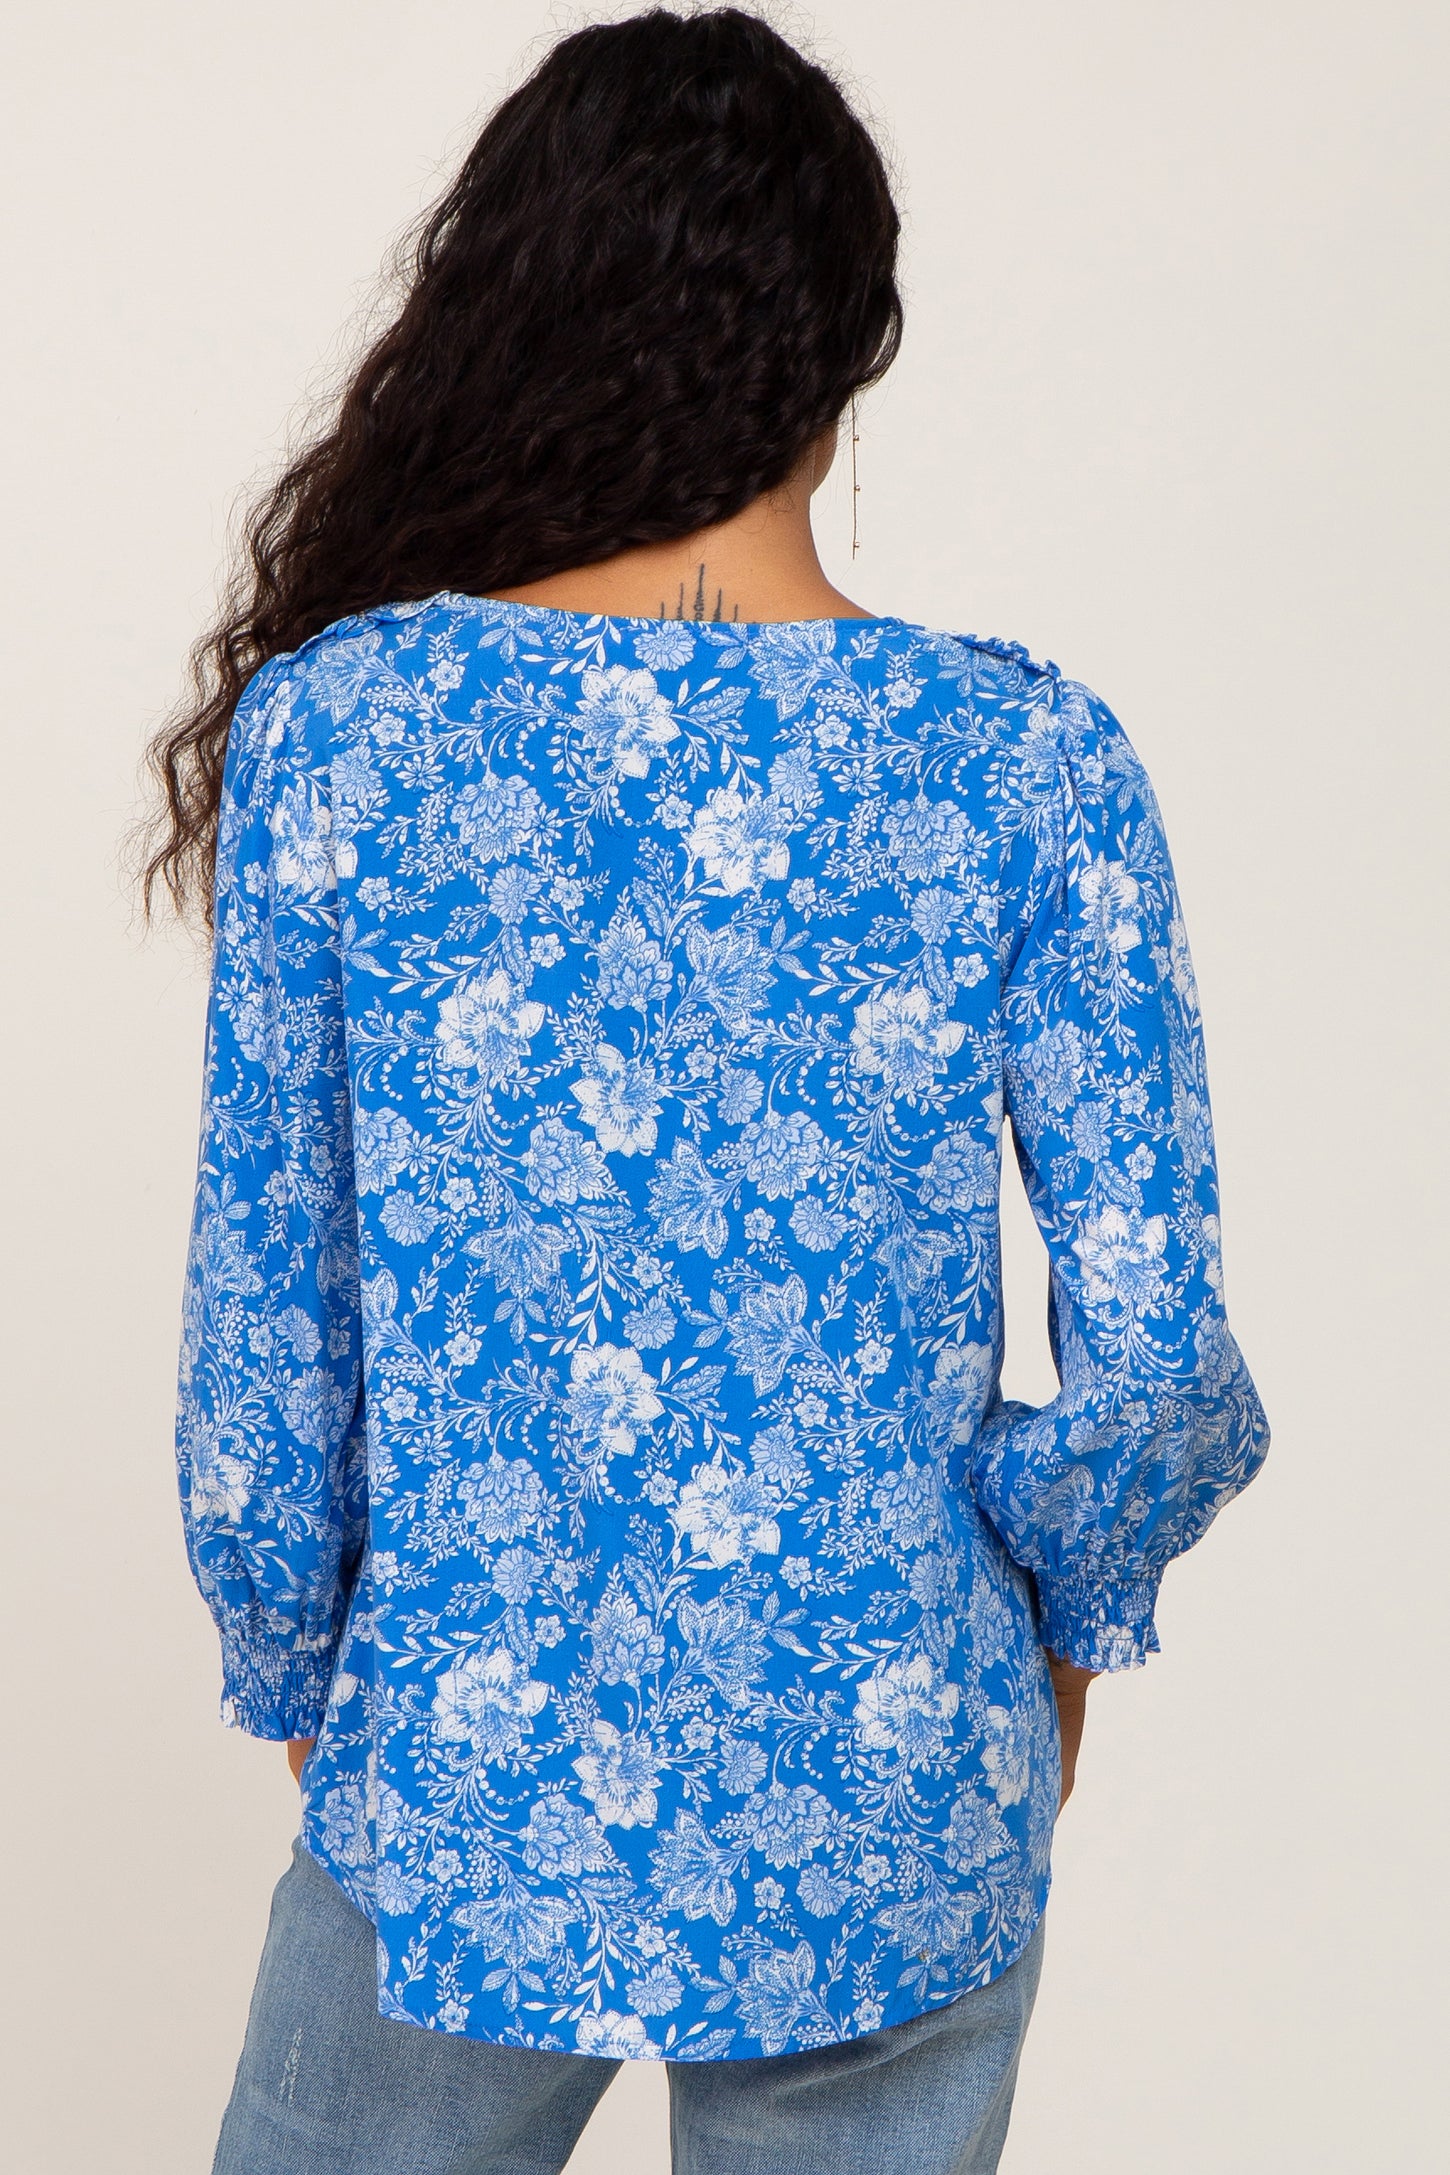 Blue Floral Paisely Button Front 3/4 Sleeve Blouse